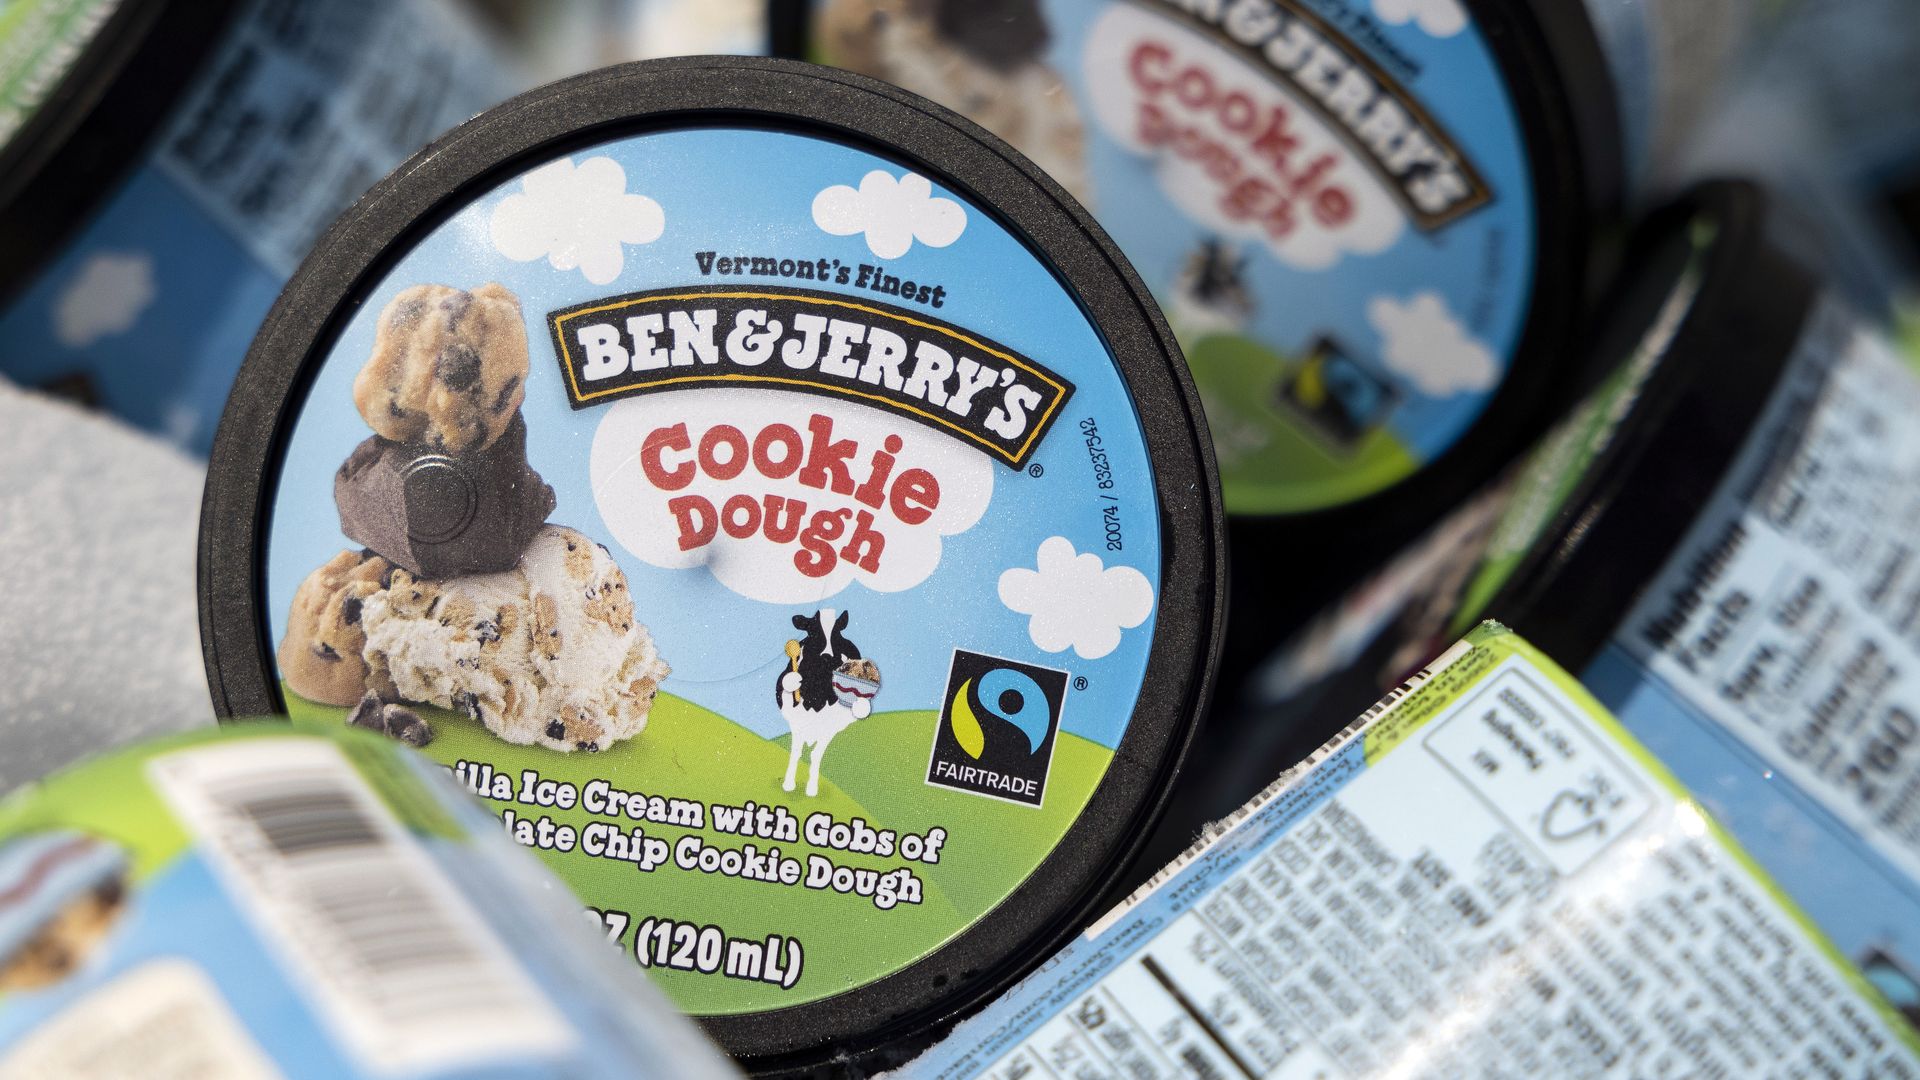 Photo of Ben & Jerry's ice cream cartoons stored together